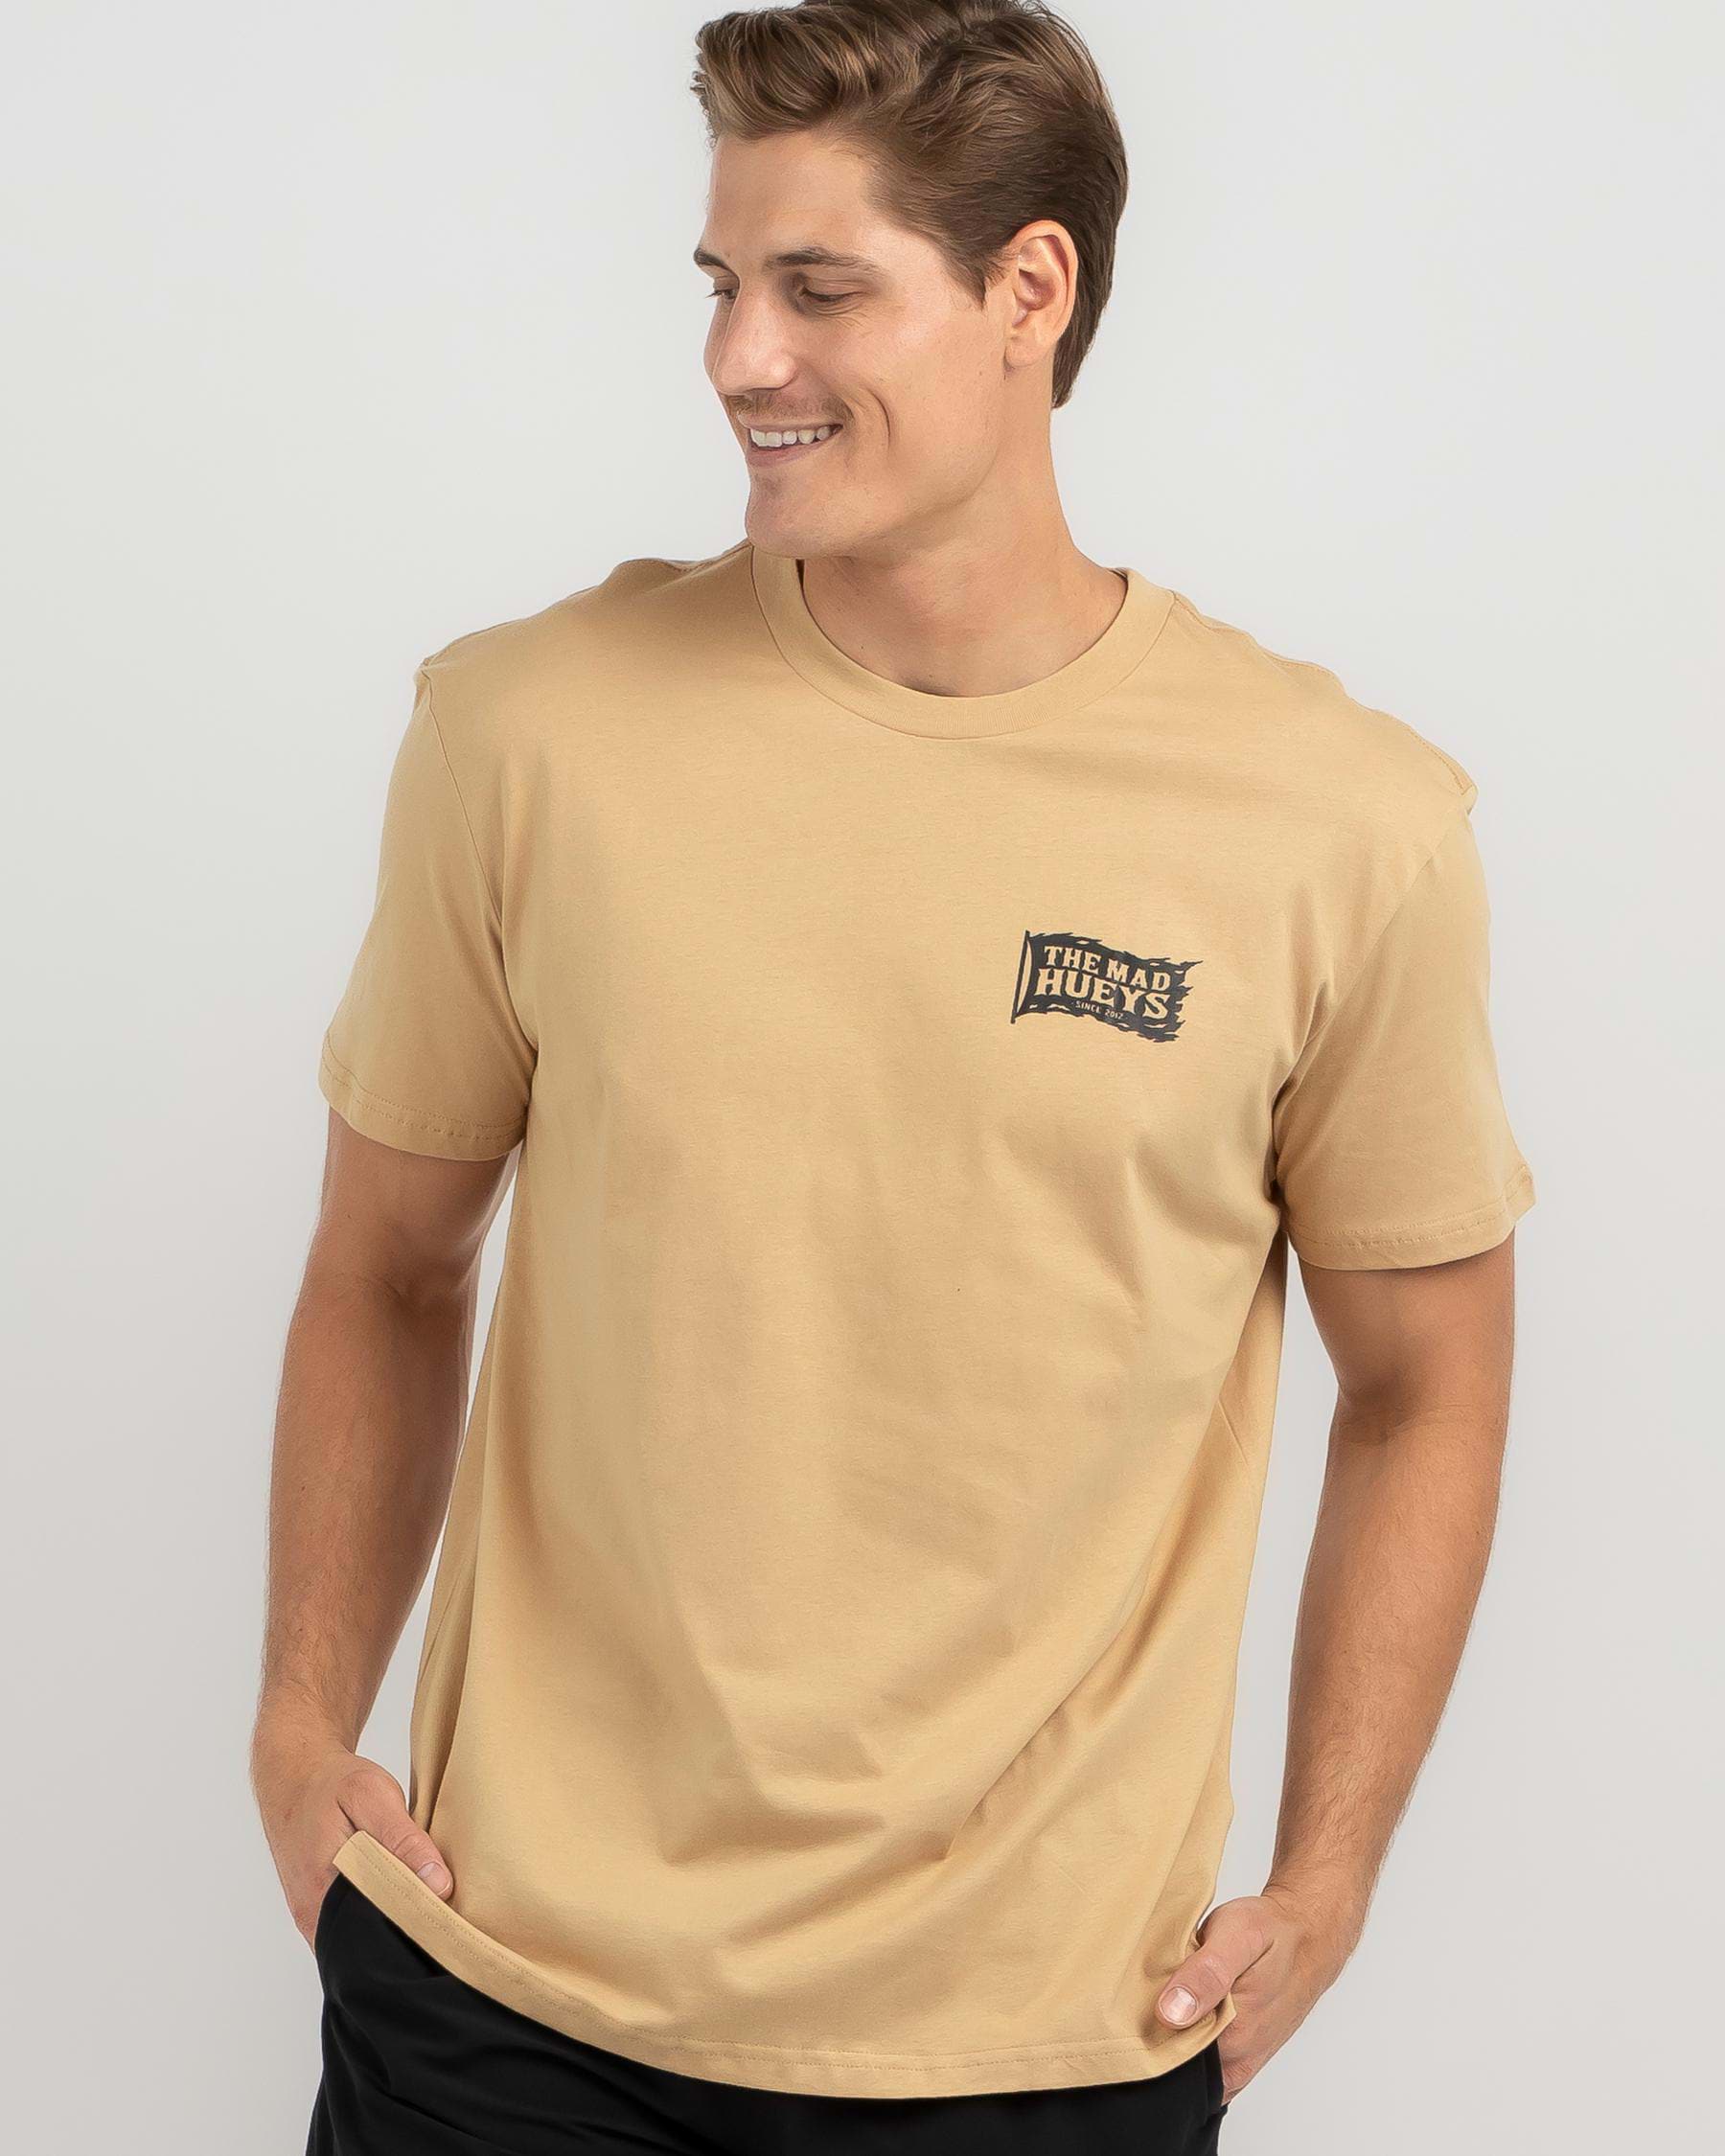 Shop The Mad Hueys Captain Cooked T-Shirt In Tan - Fast Shipping & Easy ...